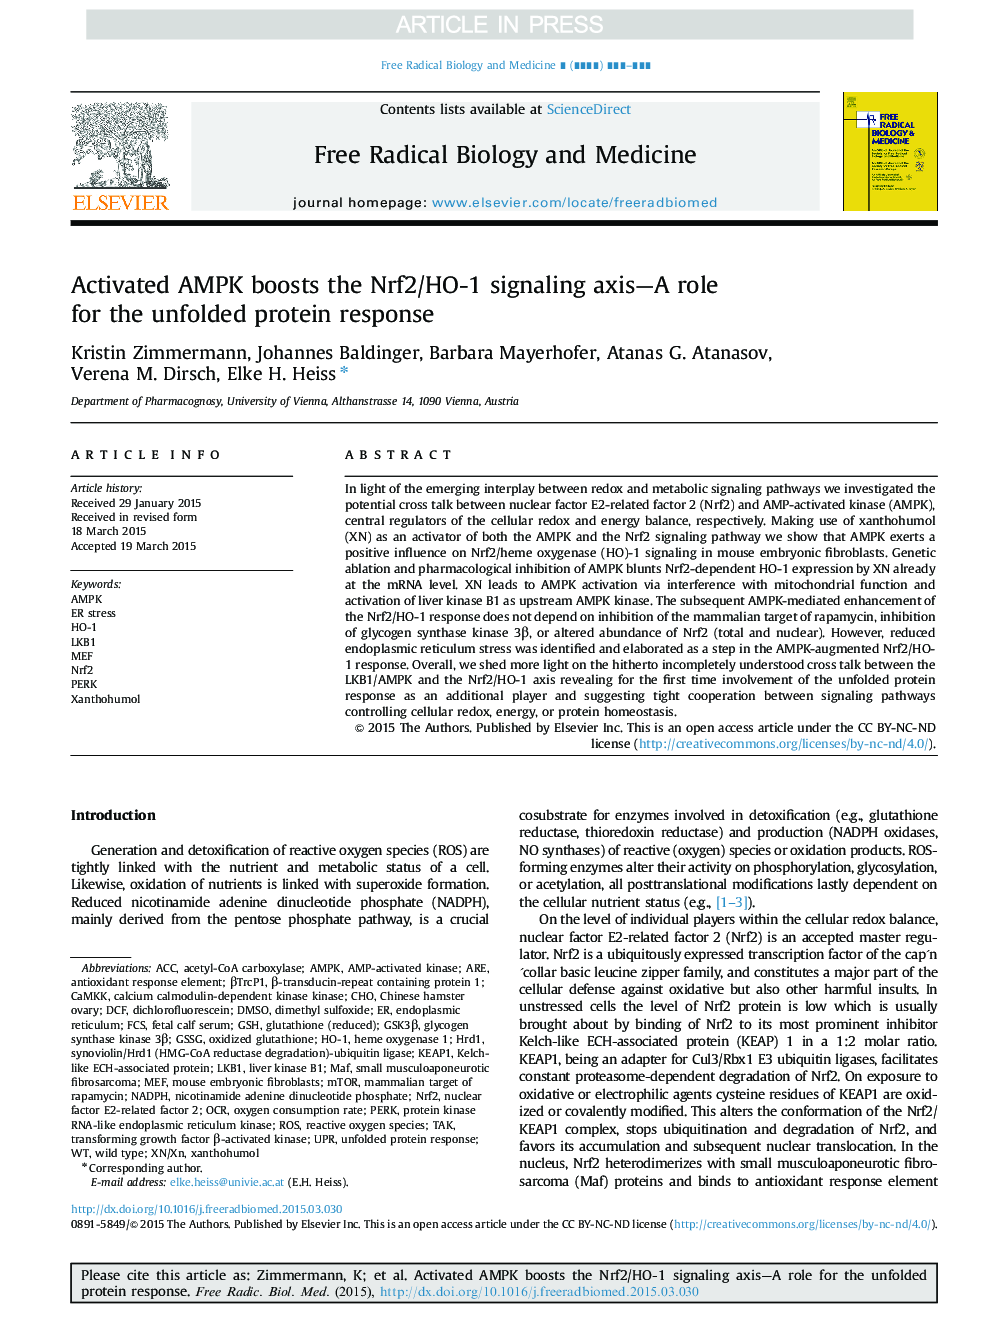 Activated AMPK boosts the Nrf2/HO-1 signaling axis-A role for the unfolded protein response